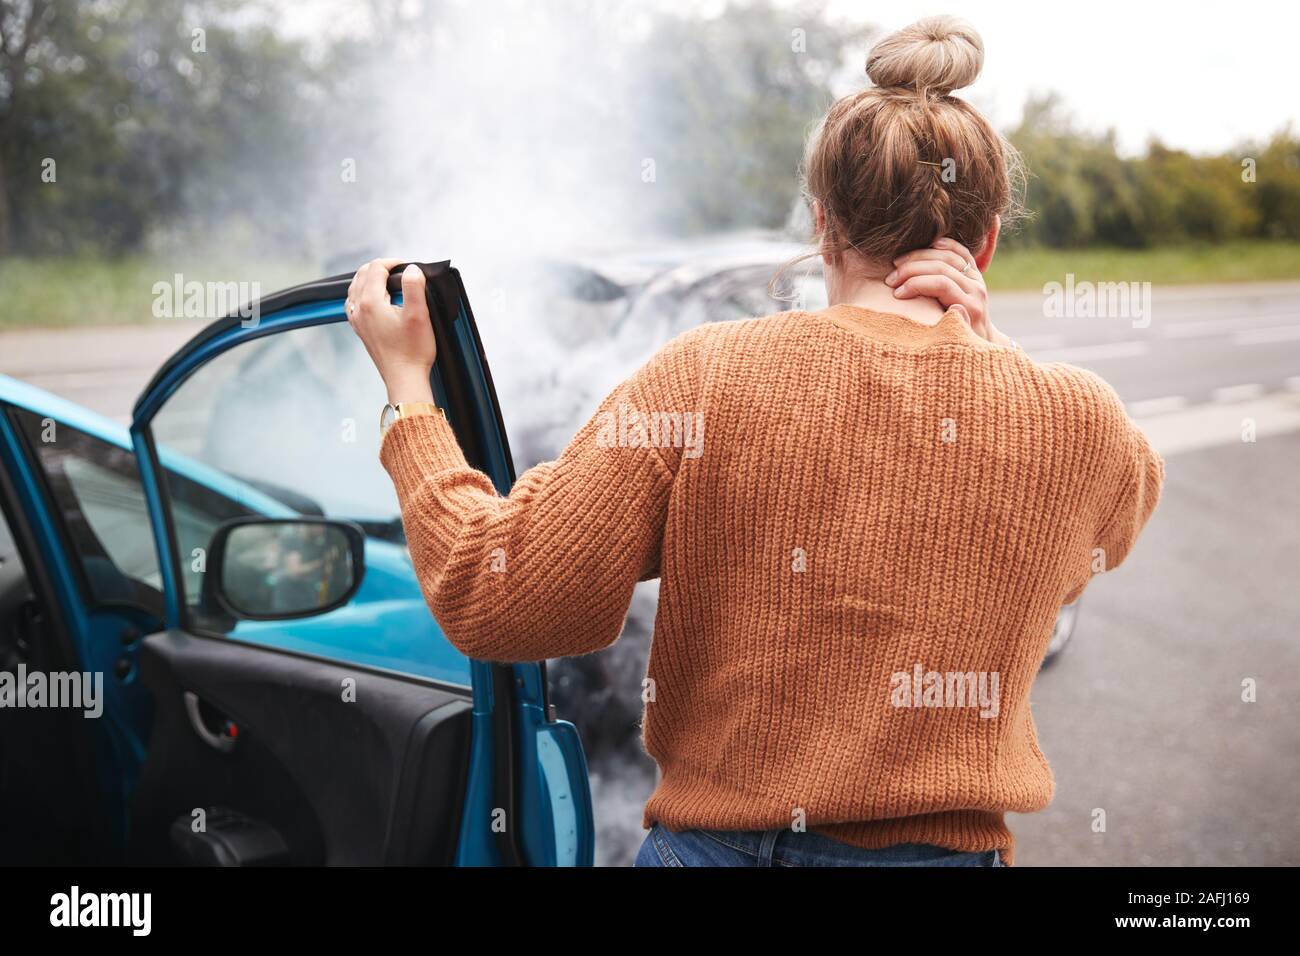 Rear View Of Female Motorist With Head Injury Getting Out Of Car After Crash Stock Photo